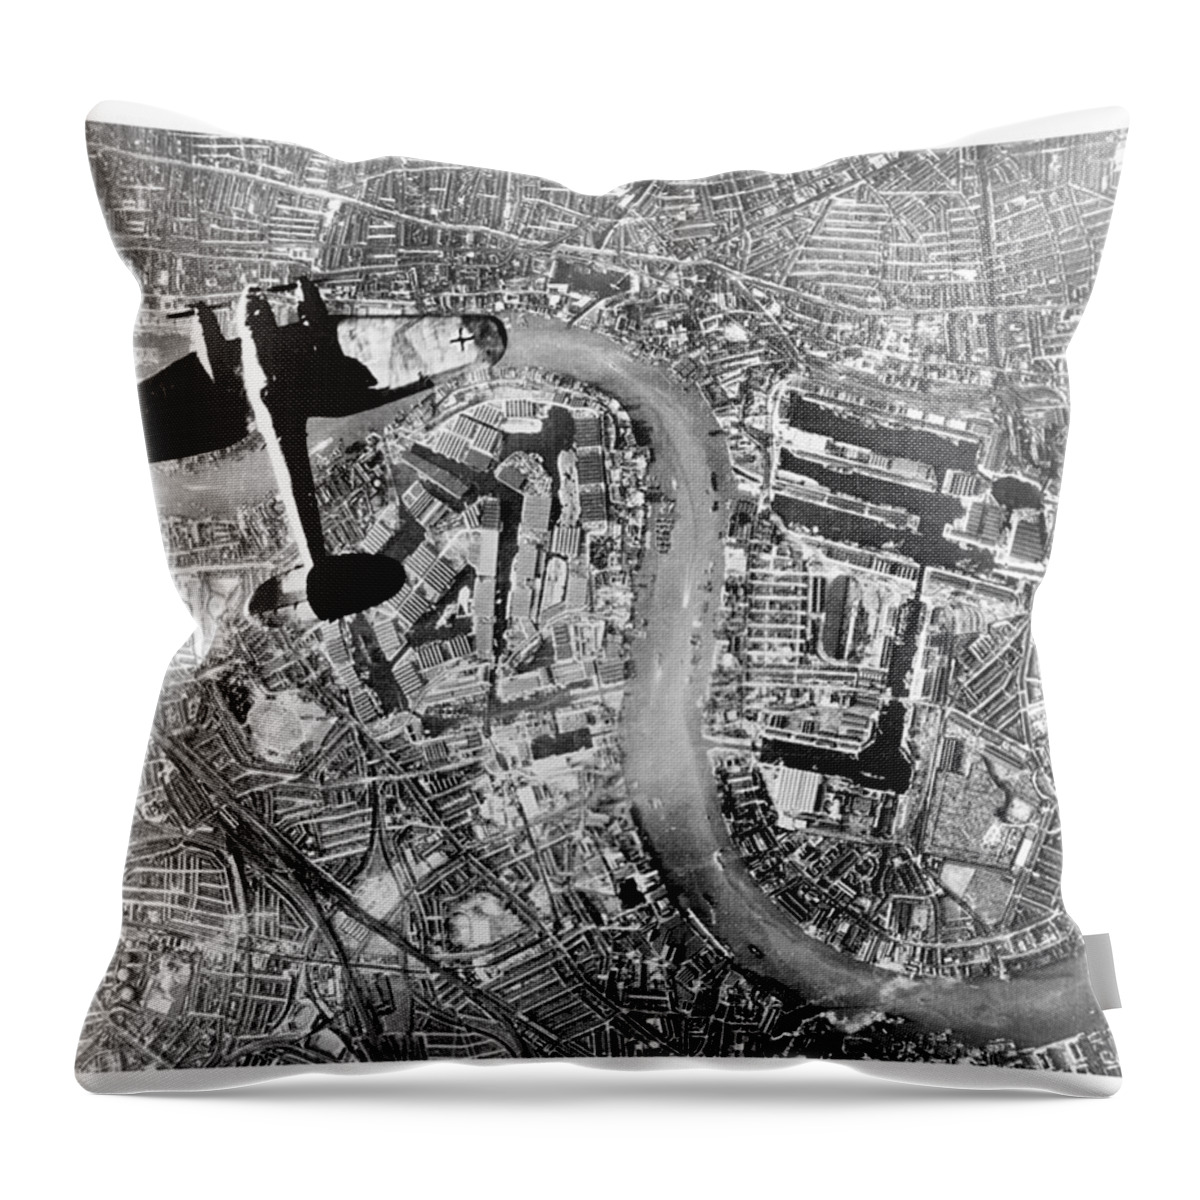 German Throw Pillow featuring the photograph Heinkel Over Wapping by Chris Smith